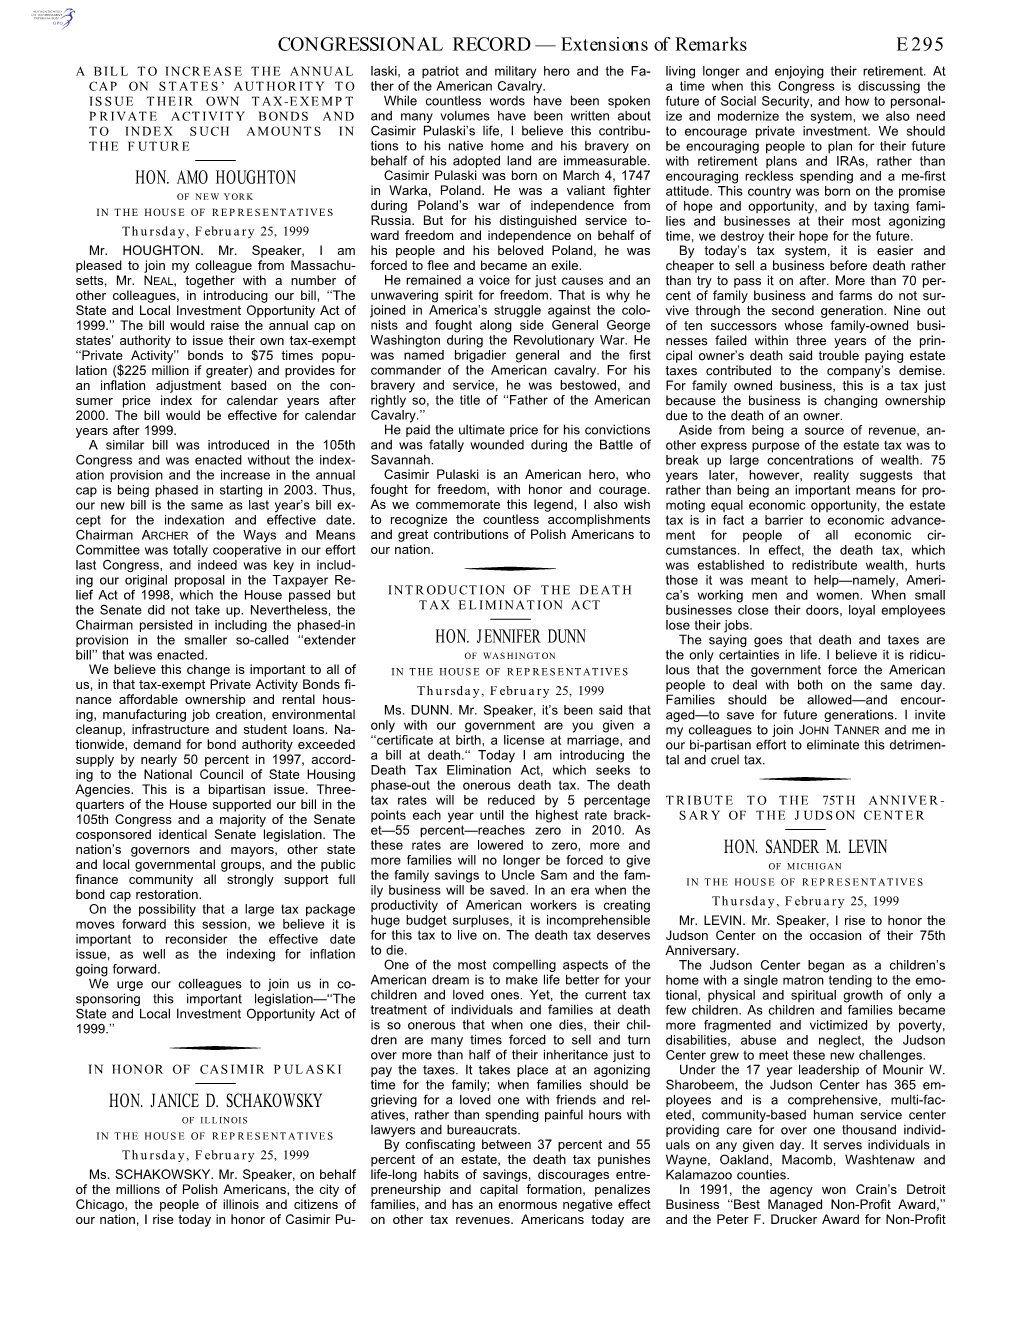 CONGRESSIONAL RECORD— Extensions of Remarks E295 HON